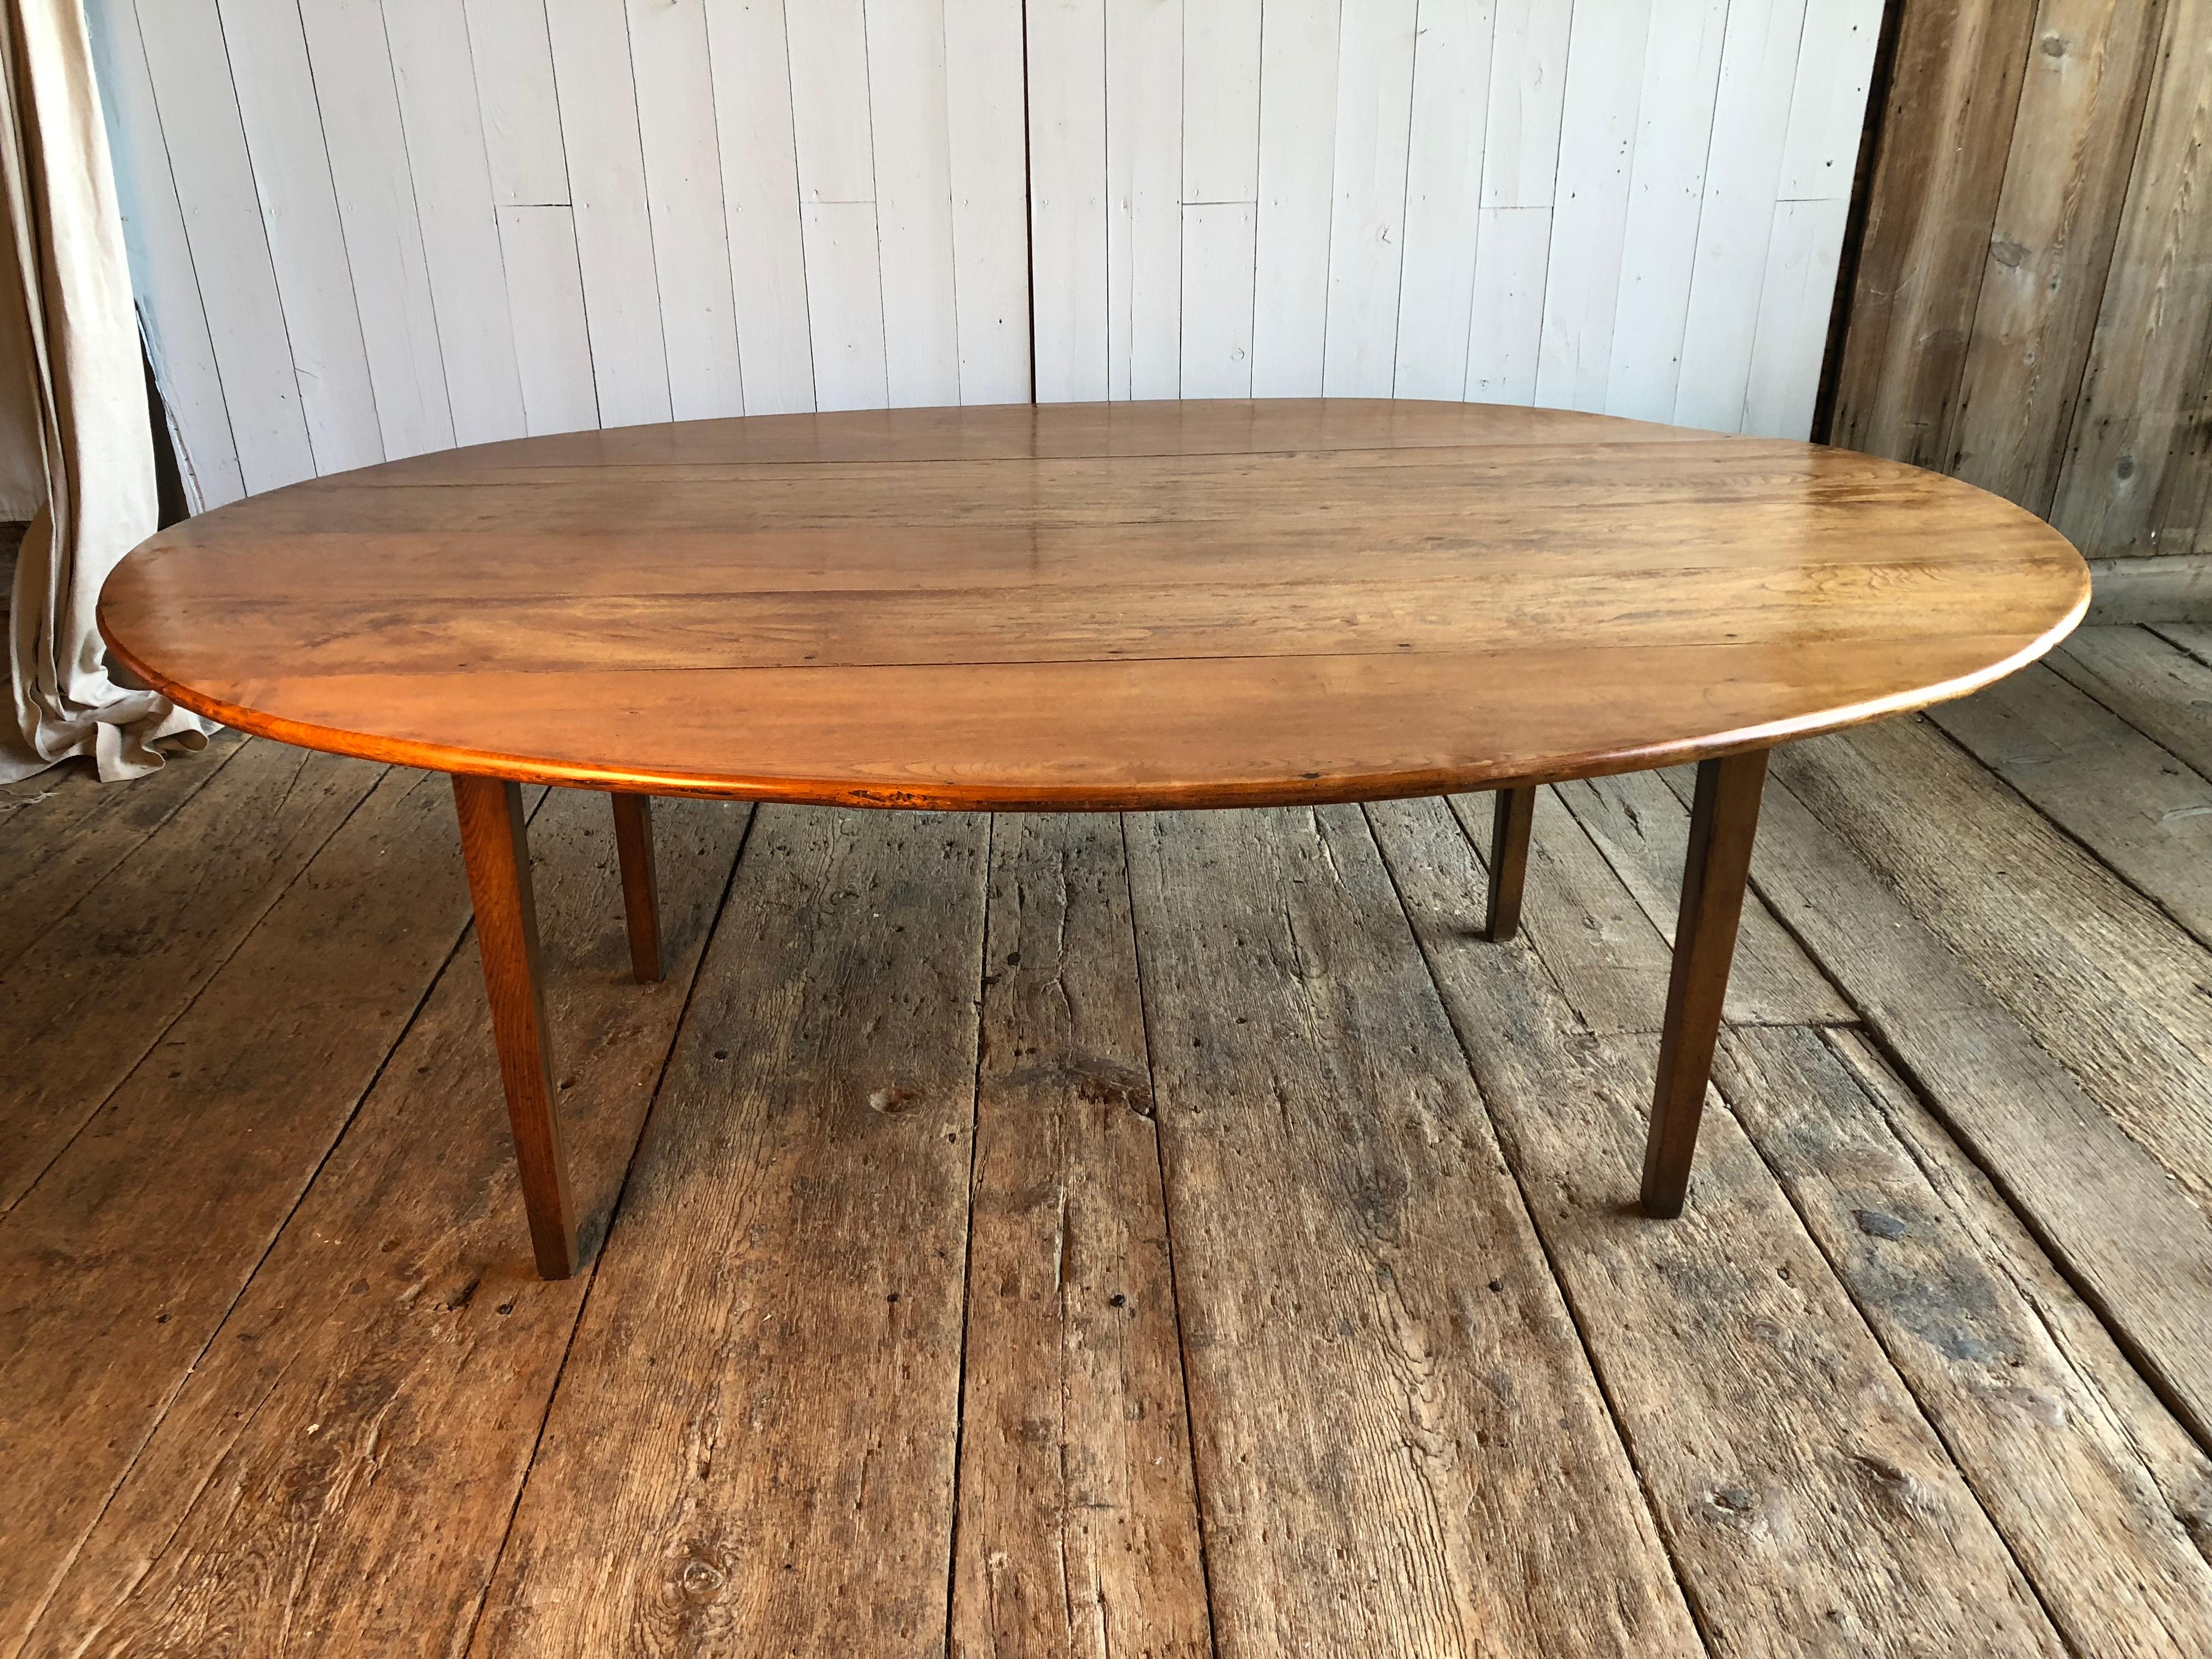 A large oval French country farm table, in fruitwood colored oak, with simple tapered square legs, and a large drawer on one end, late 19th-early 20th century.